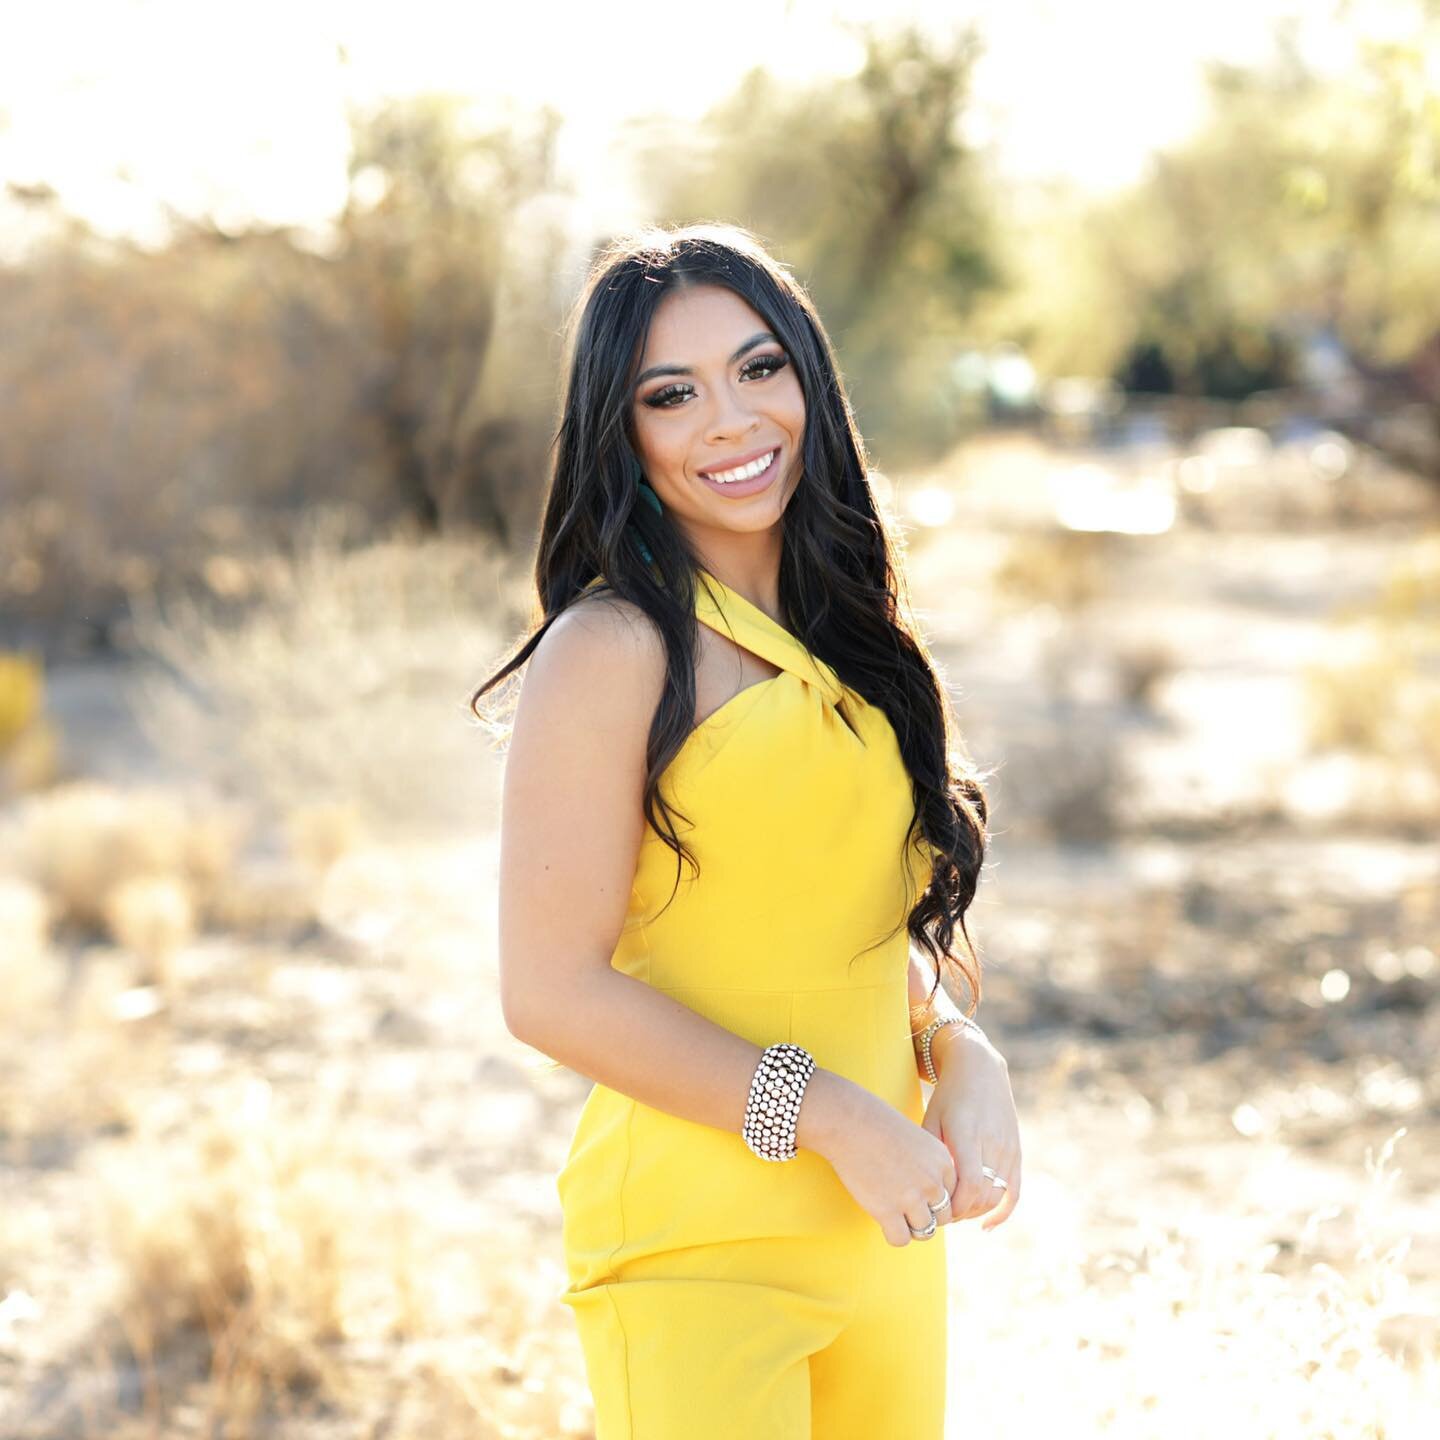 It&rsquo;s cold and snowy in southern Utah today so I added a little sunshine ☀️

Bella, you shine so bright 🌟

#yellow #seniorpictures #tucsonphotographer #sunnyand75 #senioryear #tucson #tucsonseniorpictures